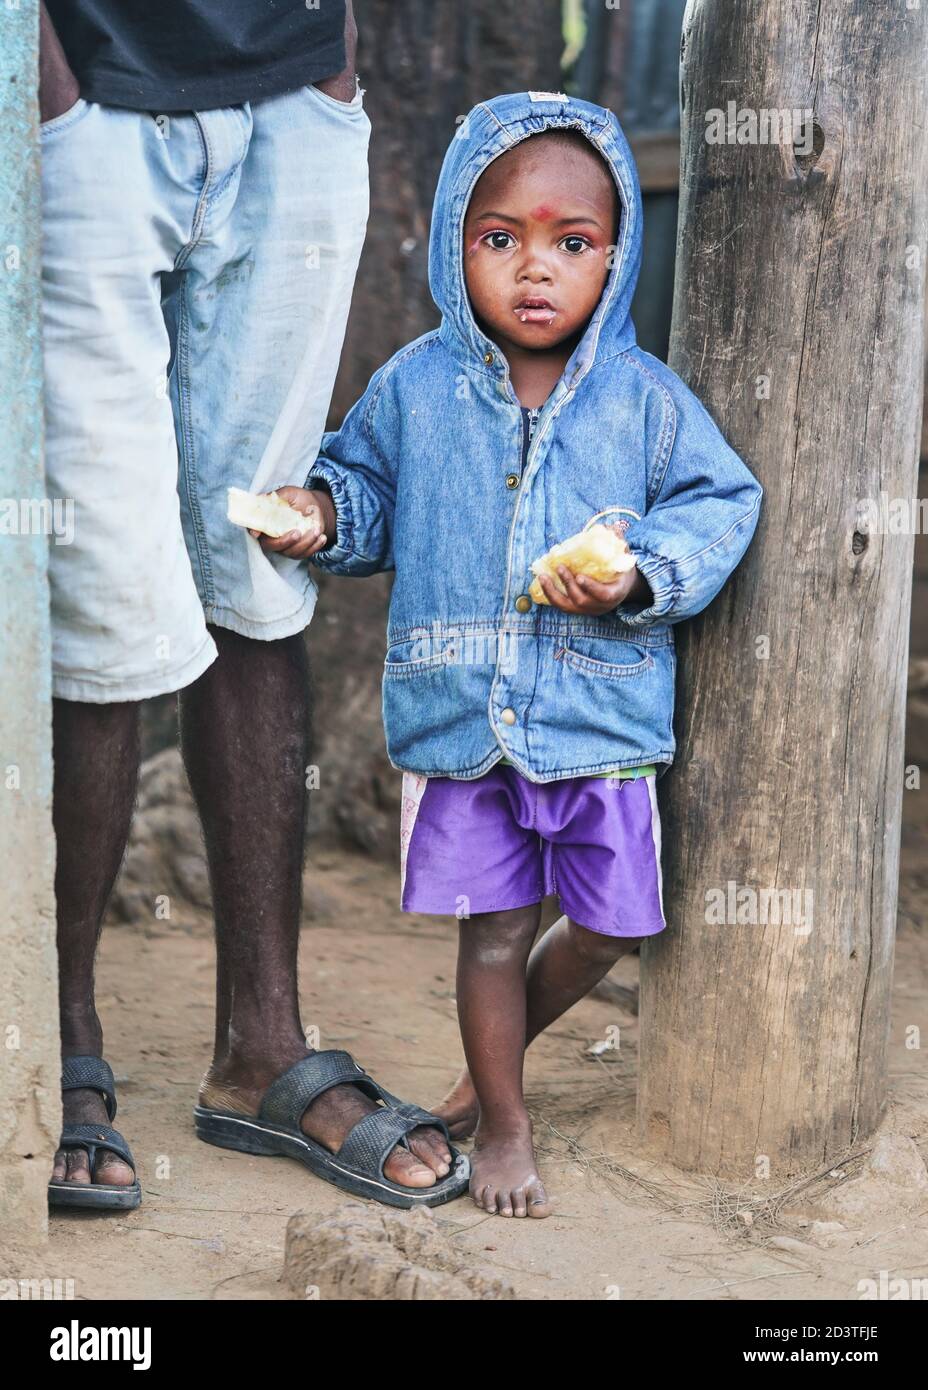 Ranohira, Madagascar - April 29, 2019: Unknown Malagasy boy, in blue denim jacket with hood and shorts, barefoot, standing next to his father legs, ho Stock Photo